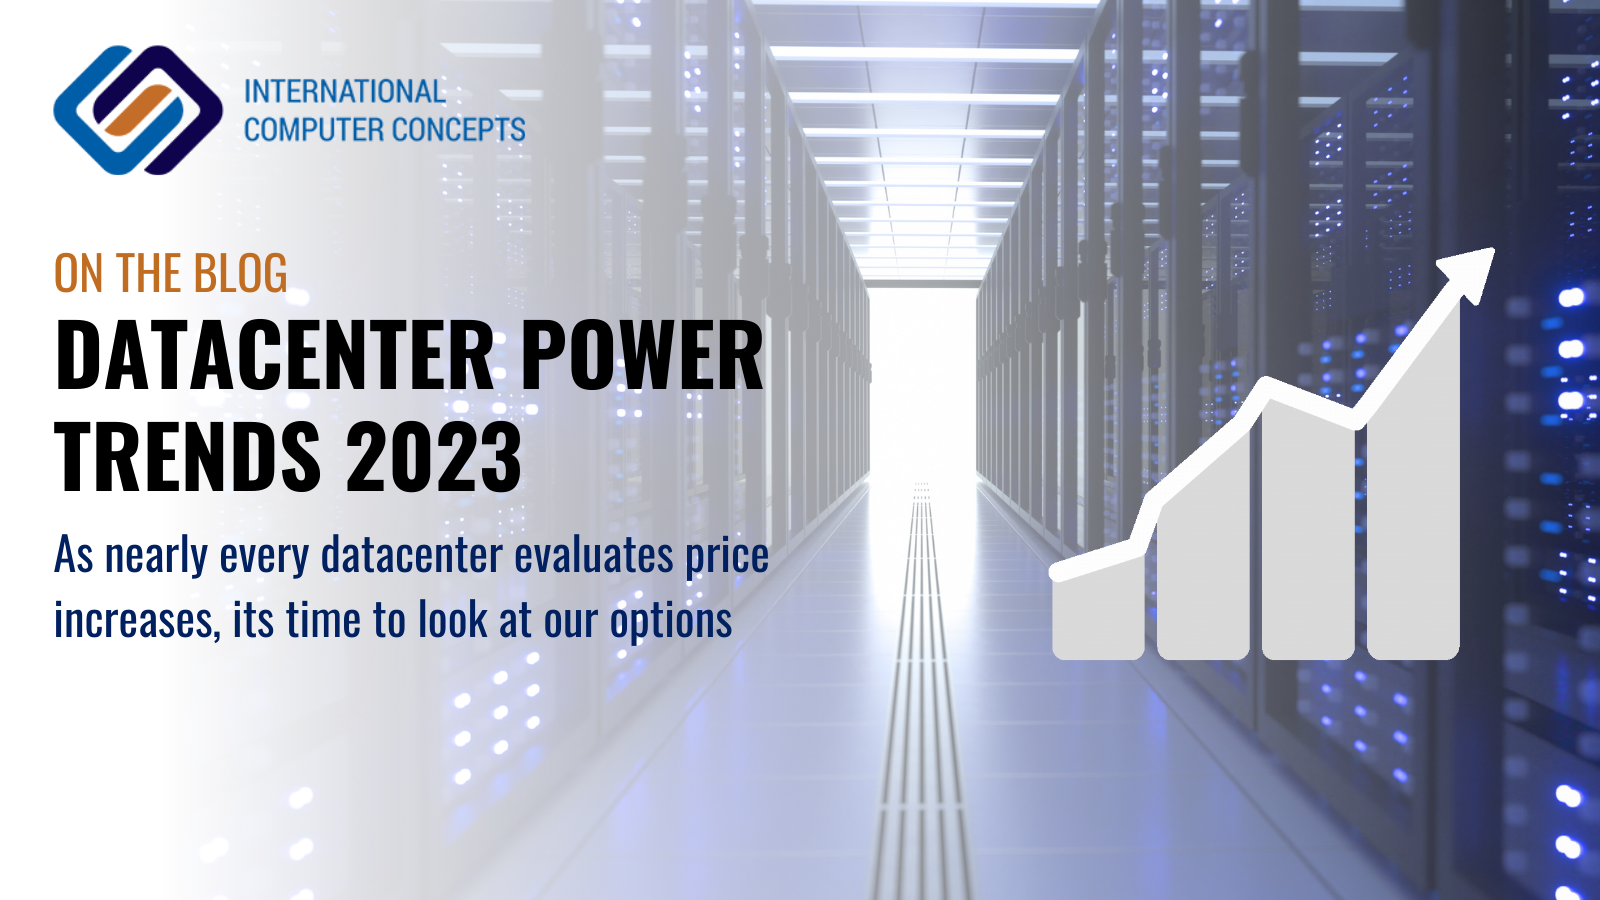 Datacenter power trends and things you can do at the server level